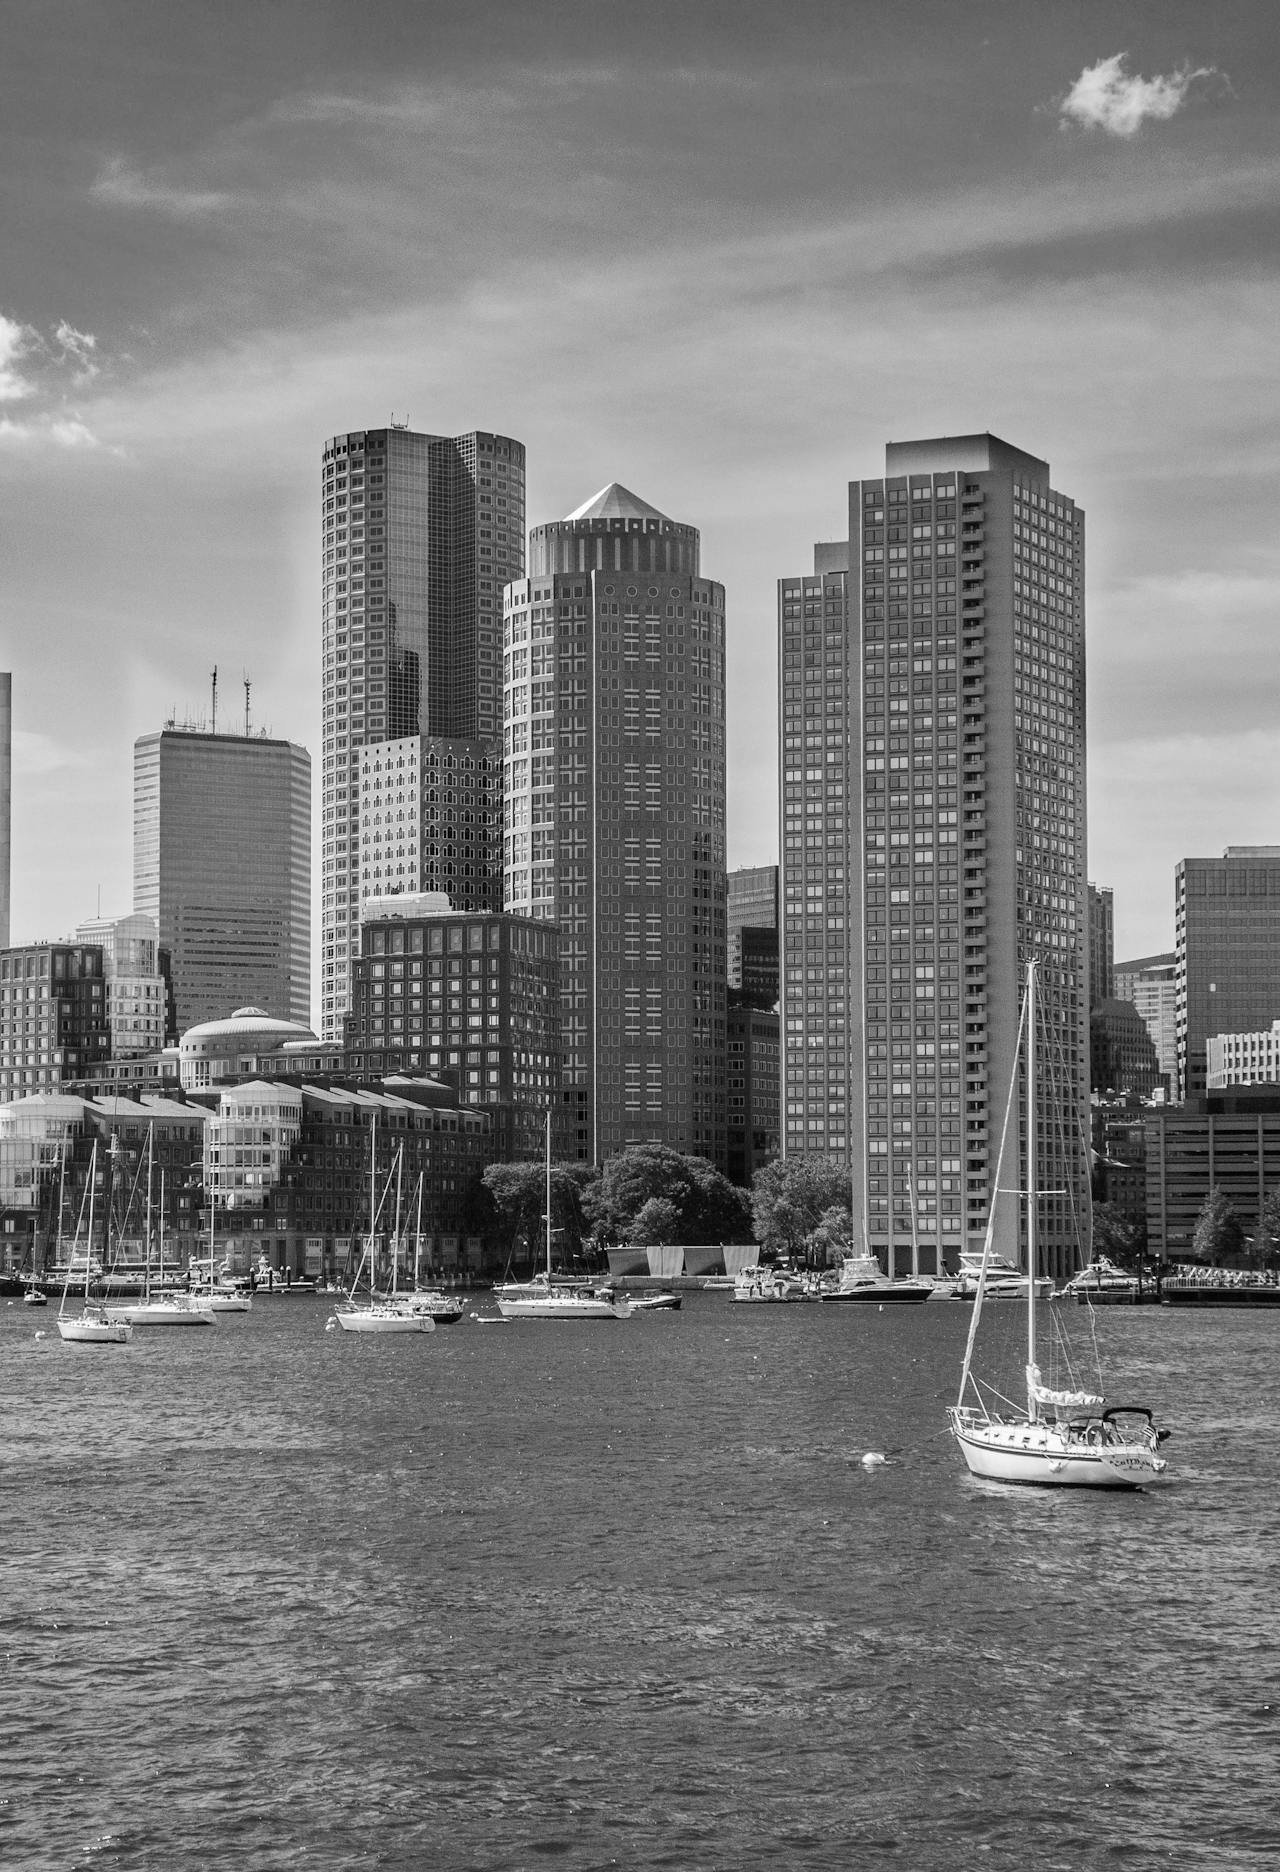 Downtown Boston view from the water with nearby luggage storage locations